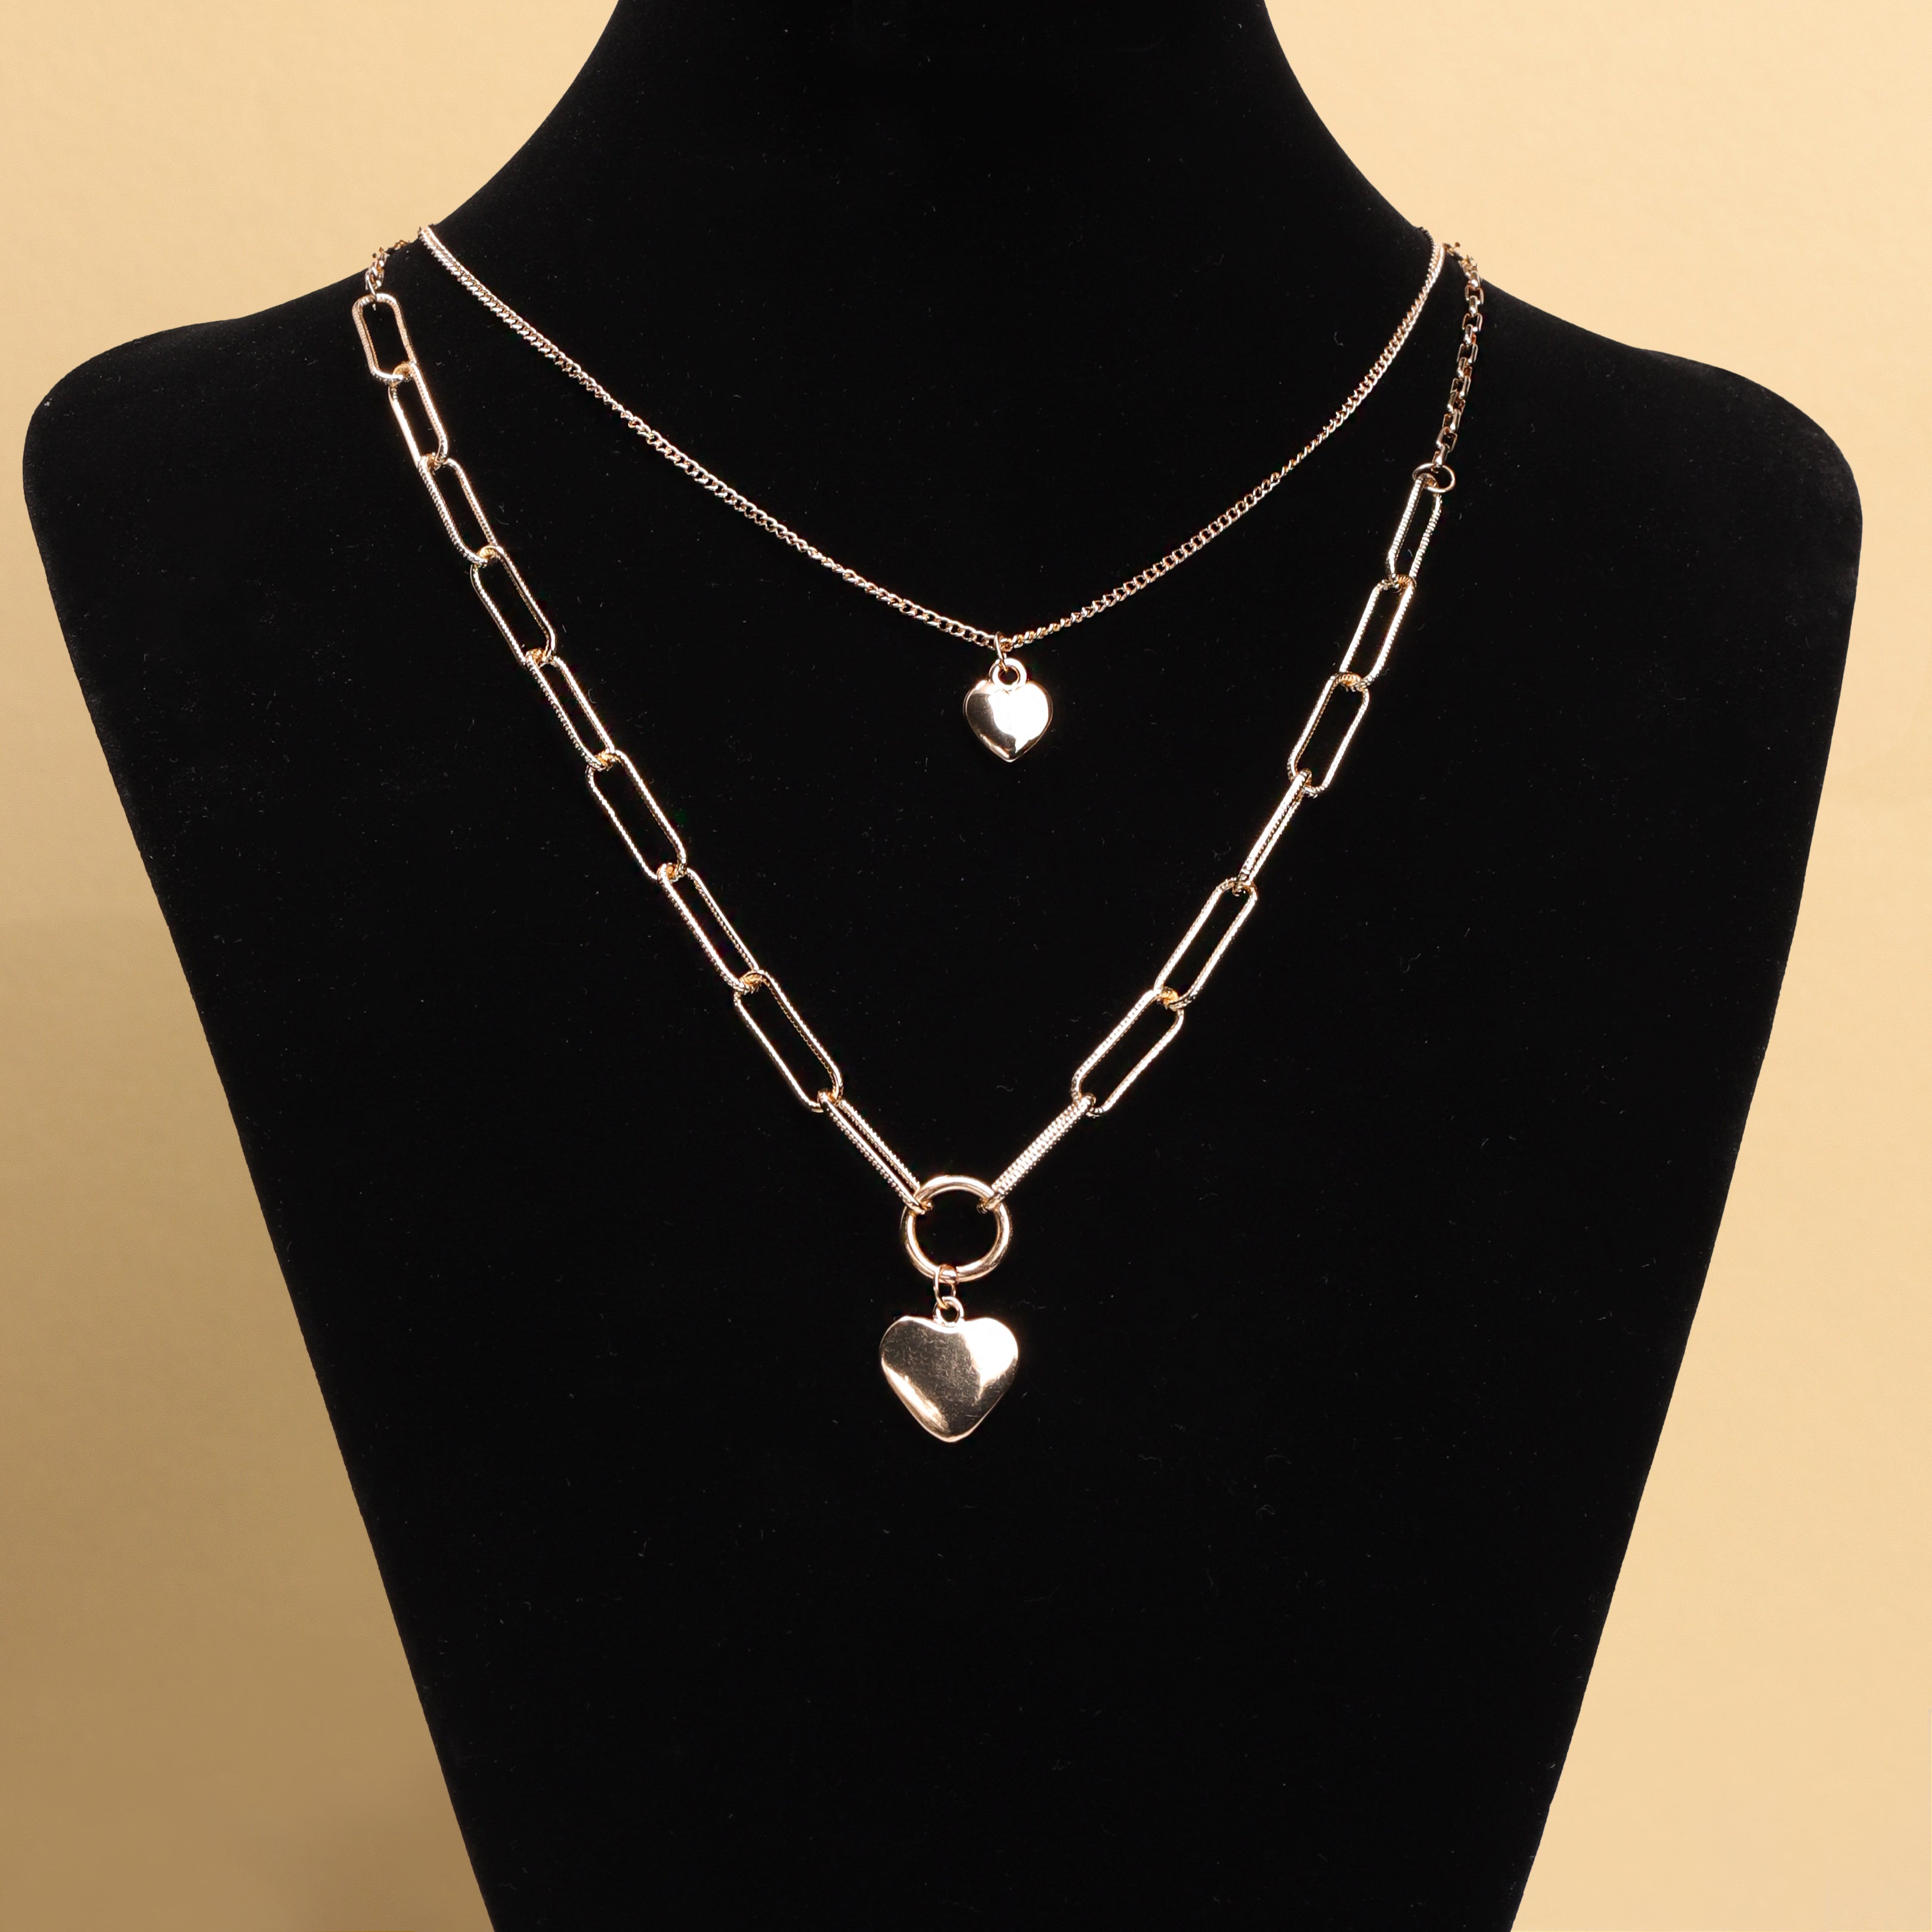 Heart Charm Layered Necklace